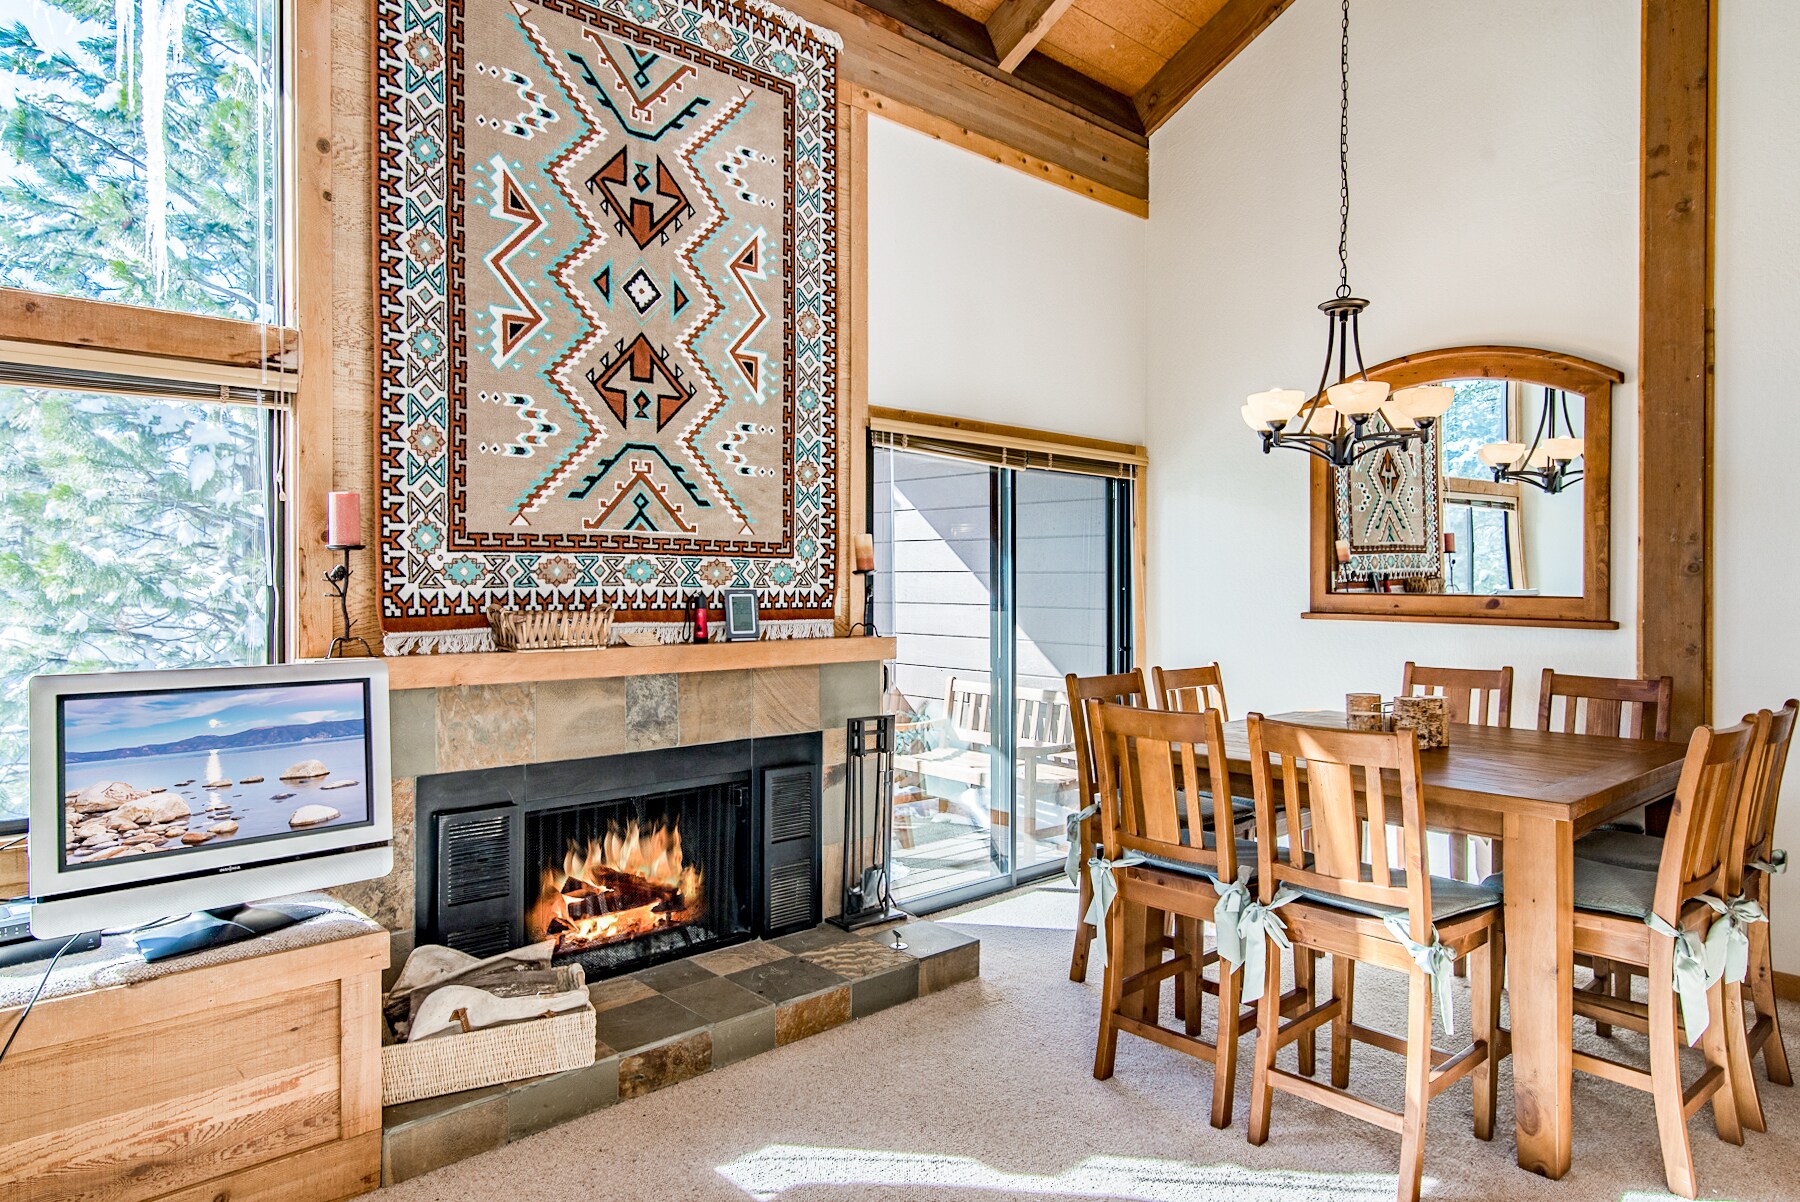 Enjoy a bite to eat next to the flickering fireplace.